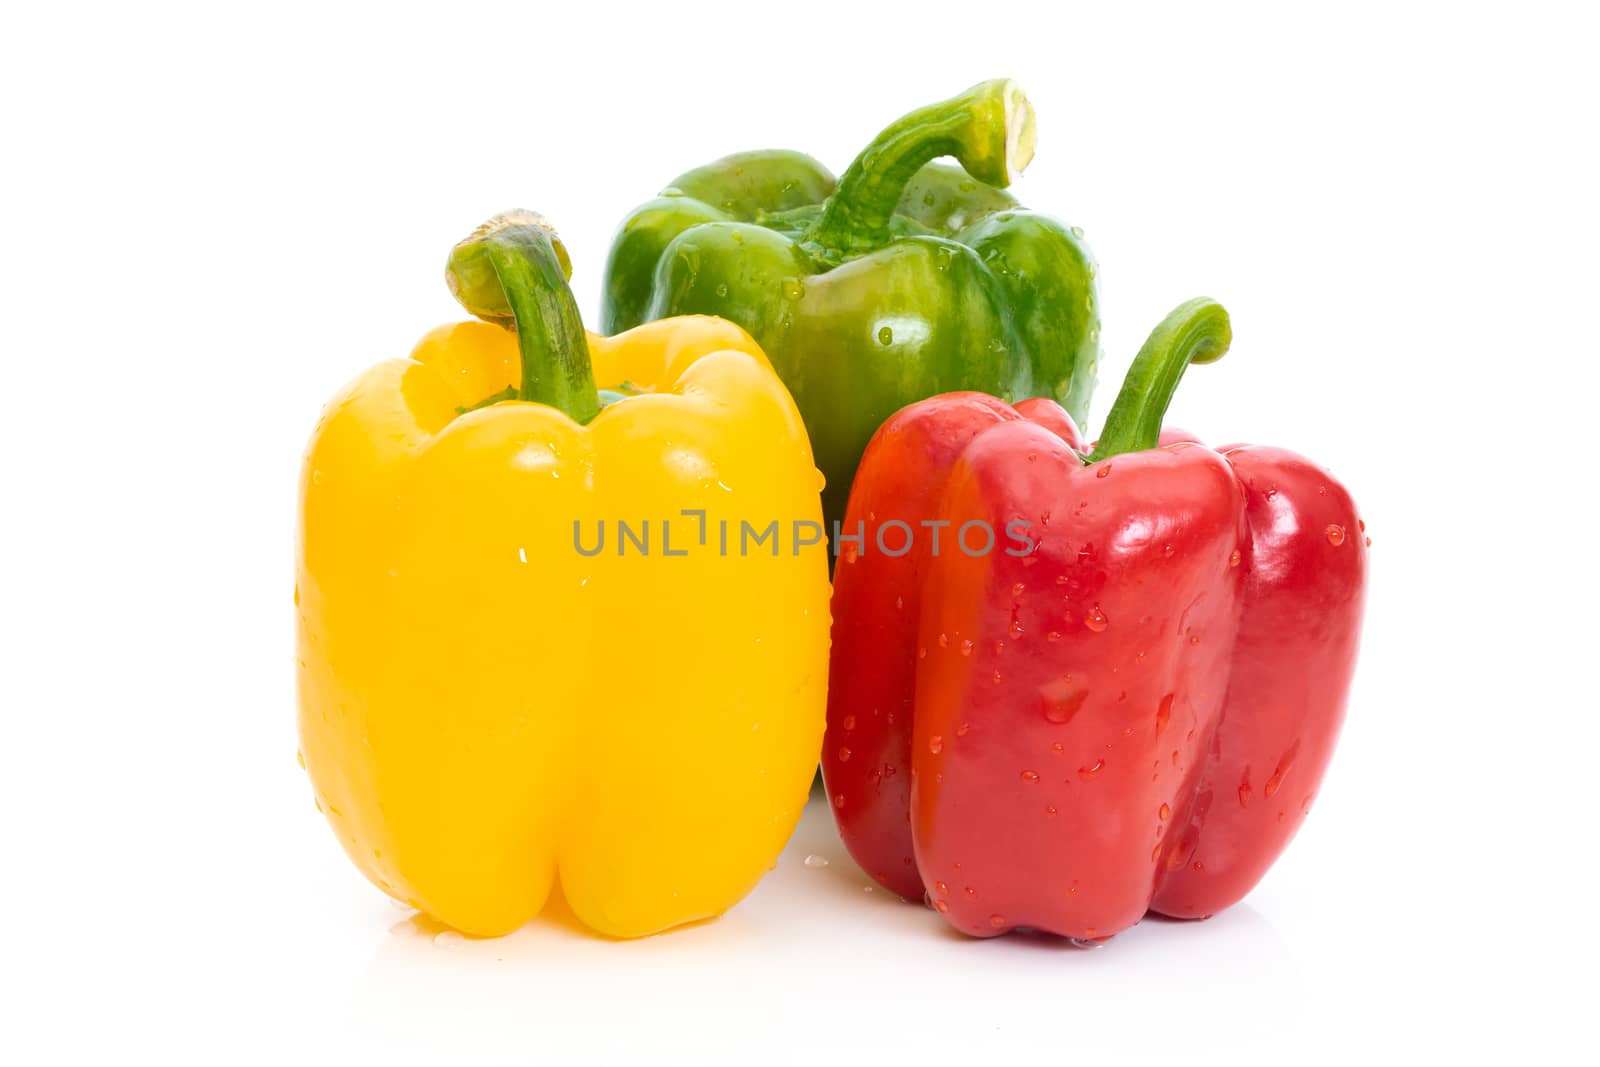 Large bell pepper red, green and yellow on a white background by sompongtom